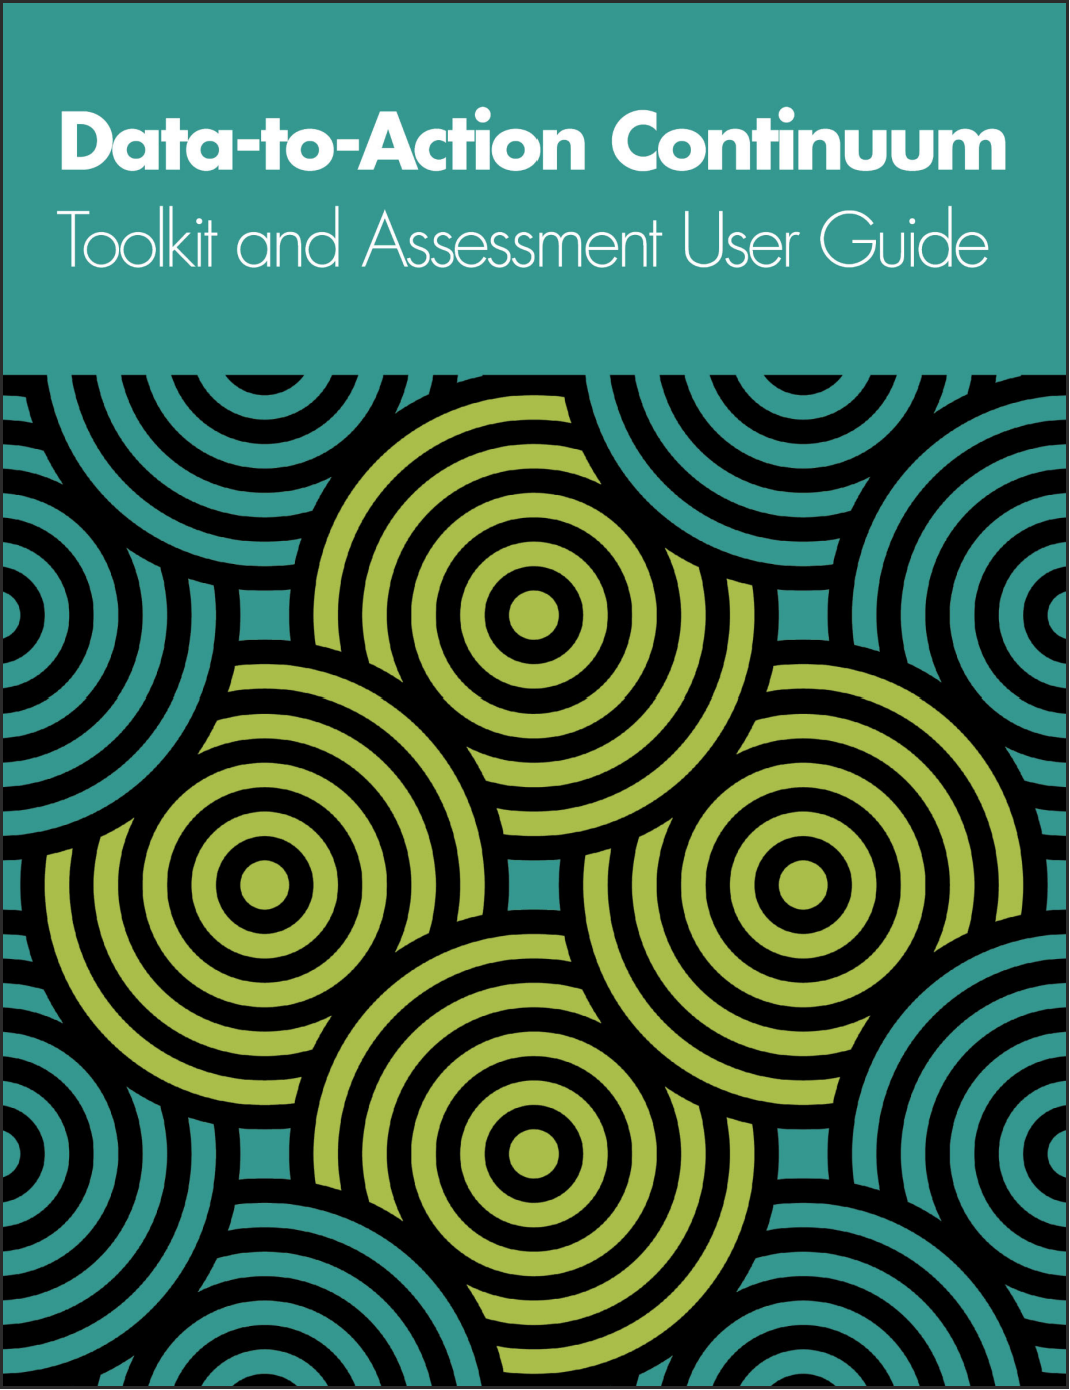 Data-to-Action Continuum Toolkit and Assessment User Guide